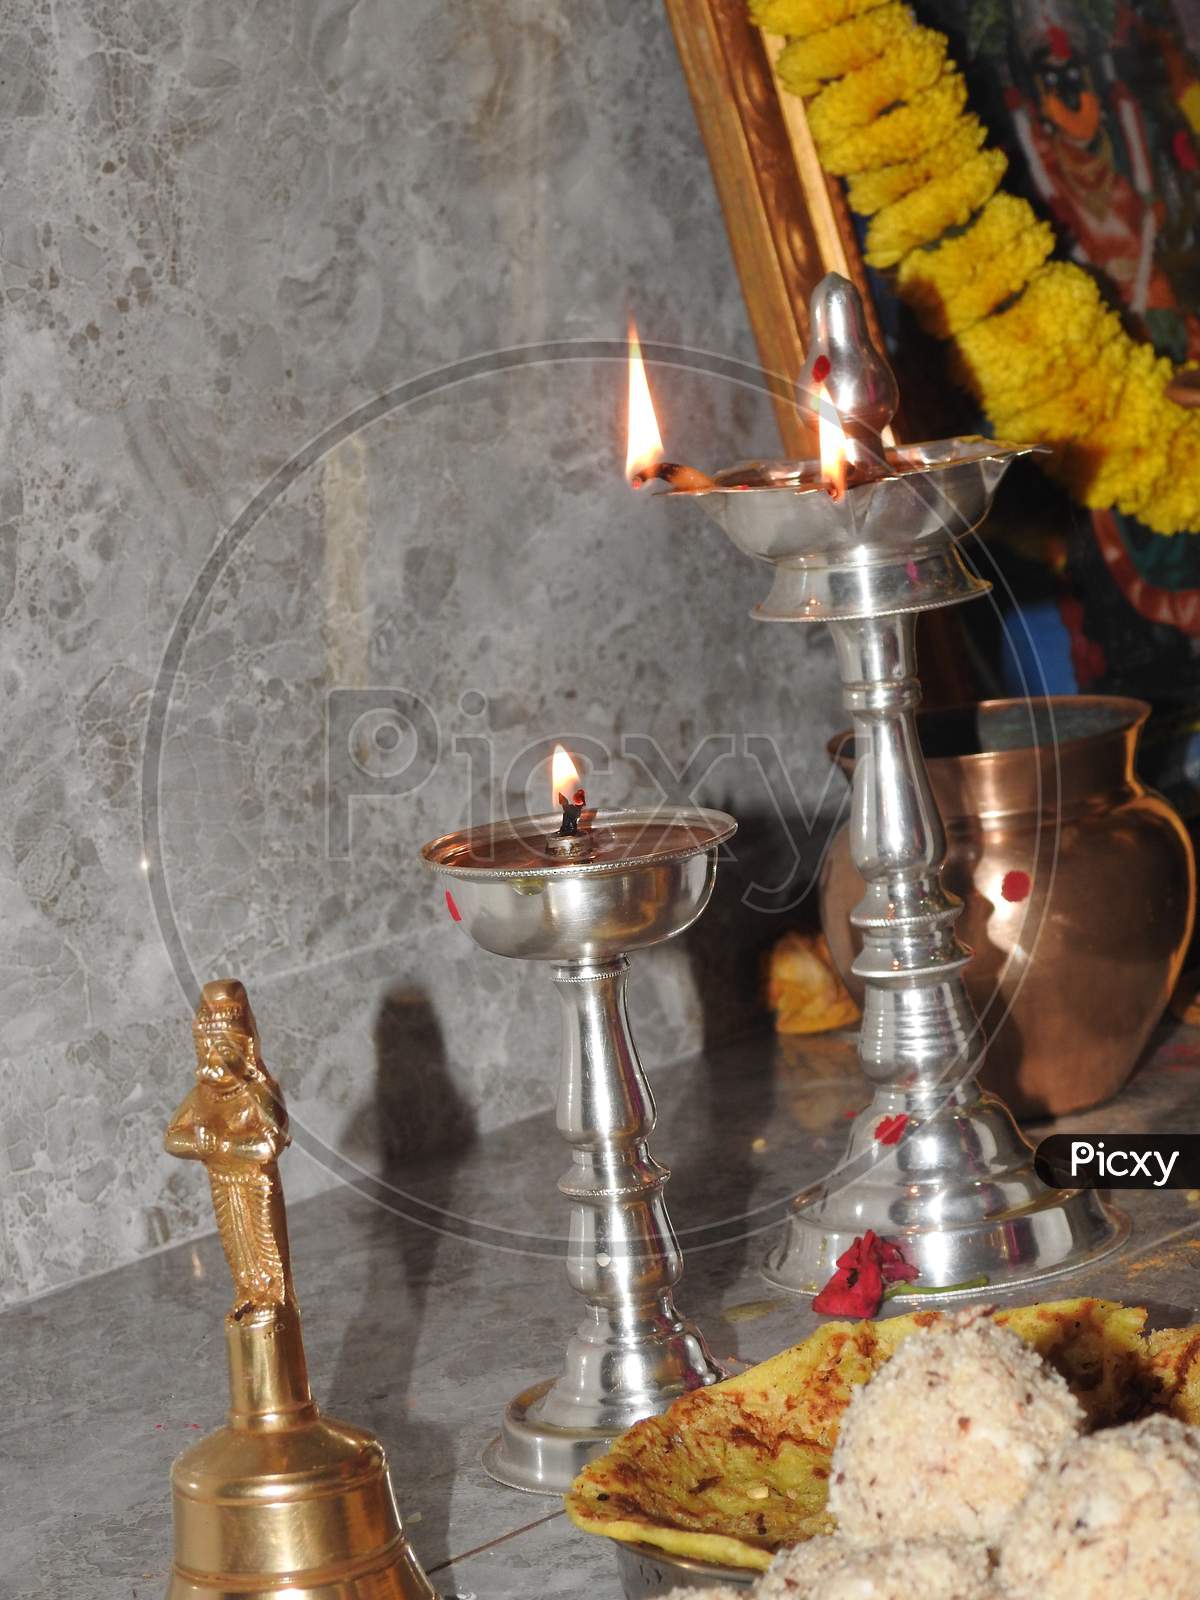 Traditional South Indian Brass Oil Lamp Or Nilavilakku. During Events Like Housewarming, Marriage Etc., The Nilavilakku Is Lighted Before Starting The Rituals